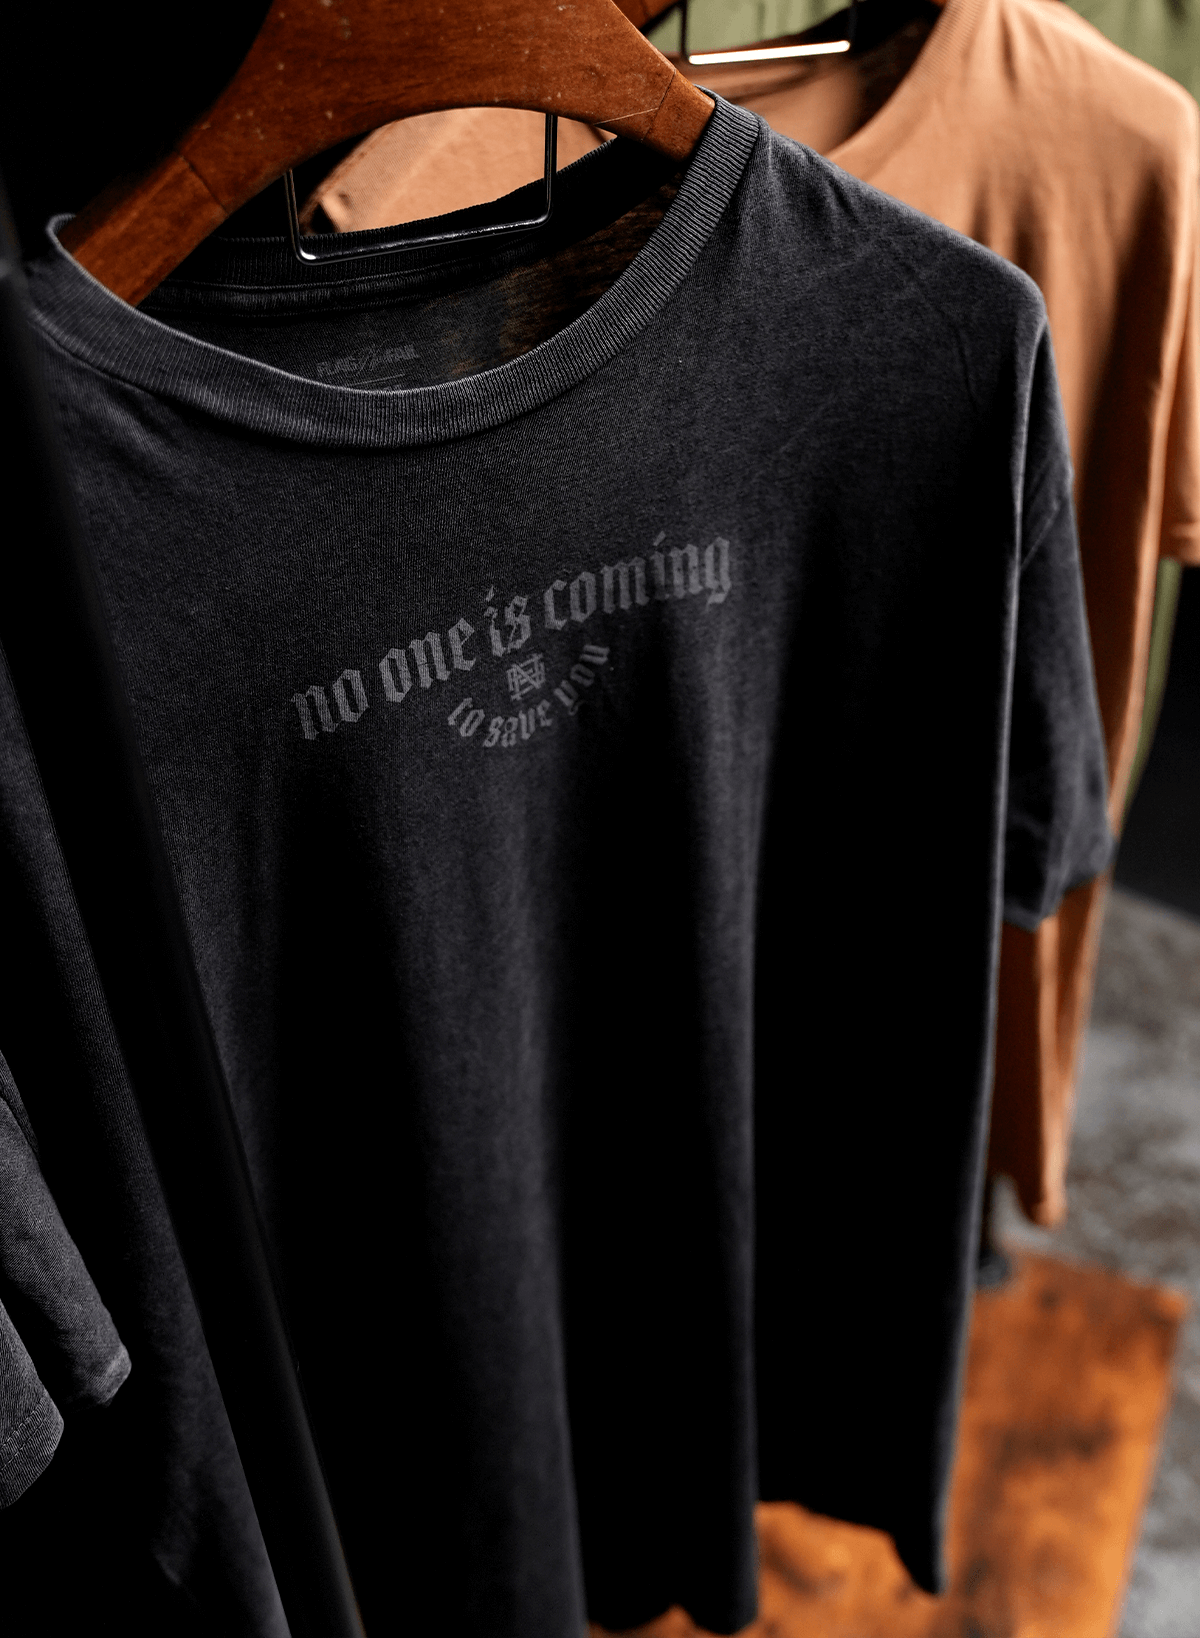 NO ONE IS COMING OVERSIZED TEE- BLACK